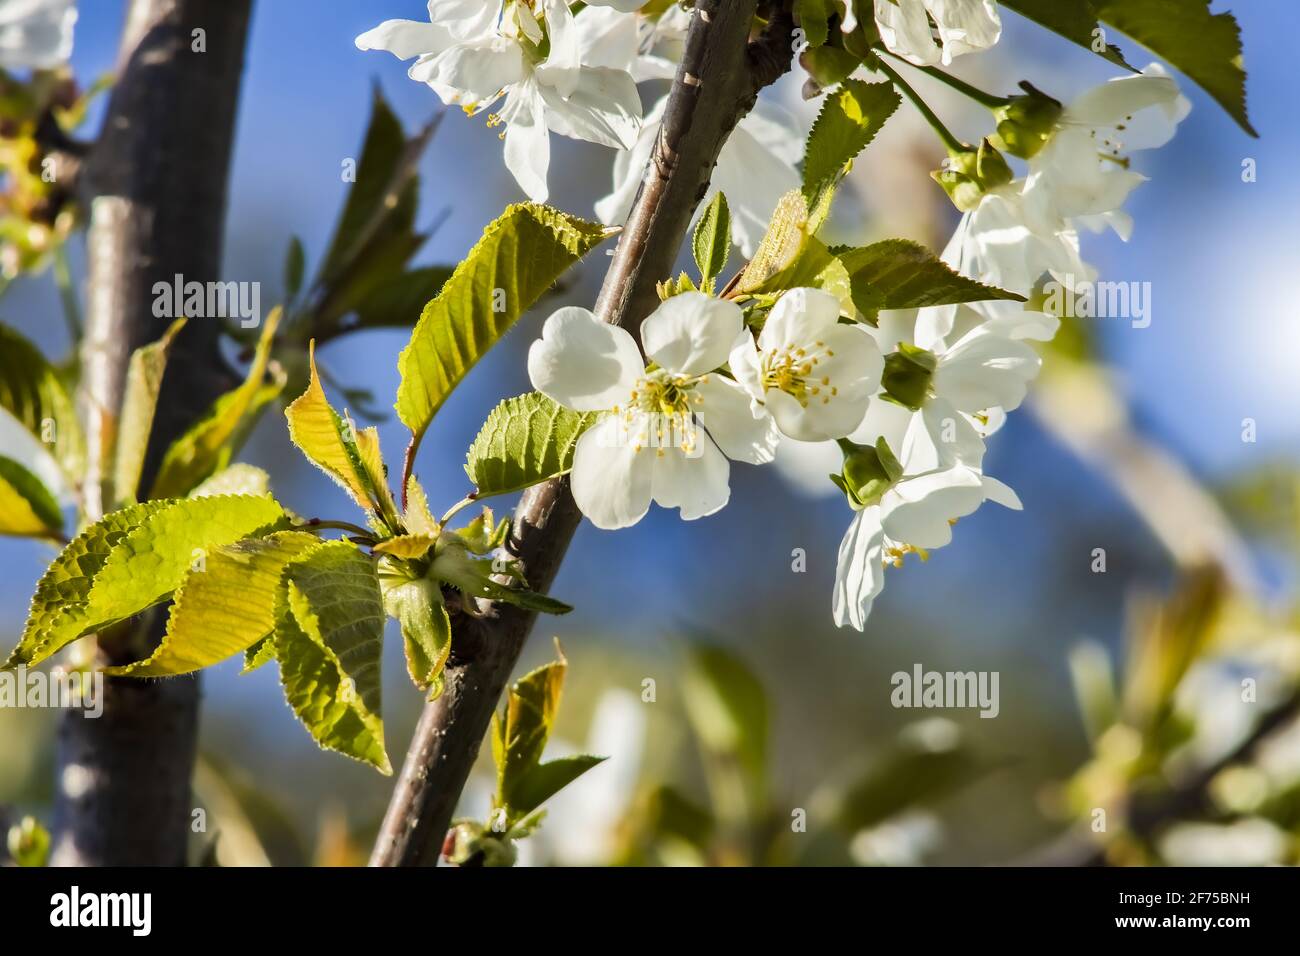 A Cluster of Cherry Blossoms on a Branch. Photo Taken on Tree in Orchard. Natural Blurred Background. Stock Photo